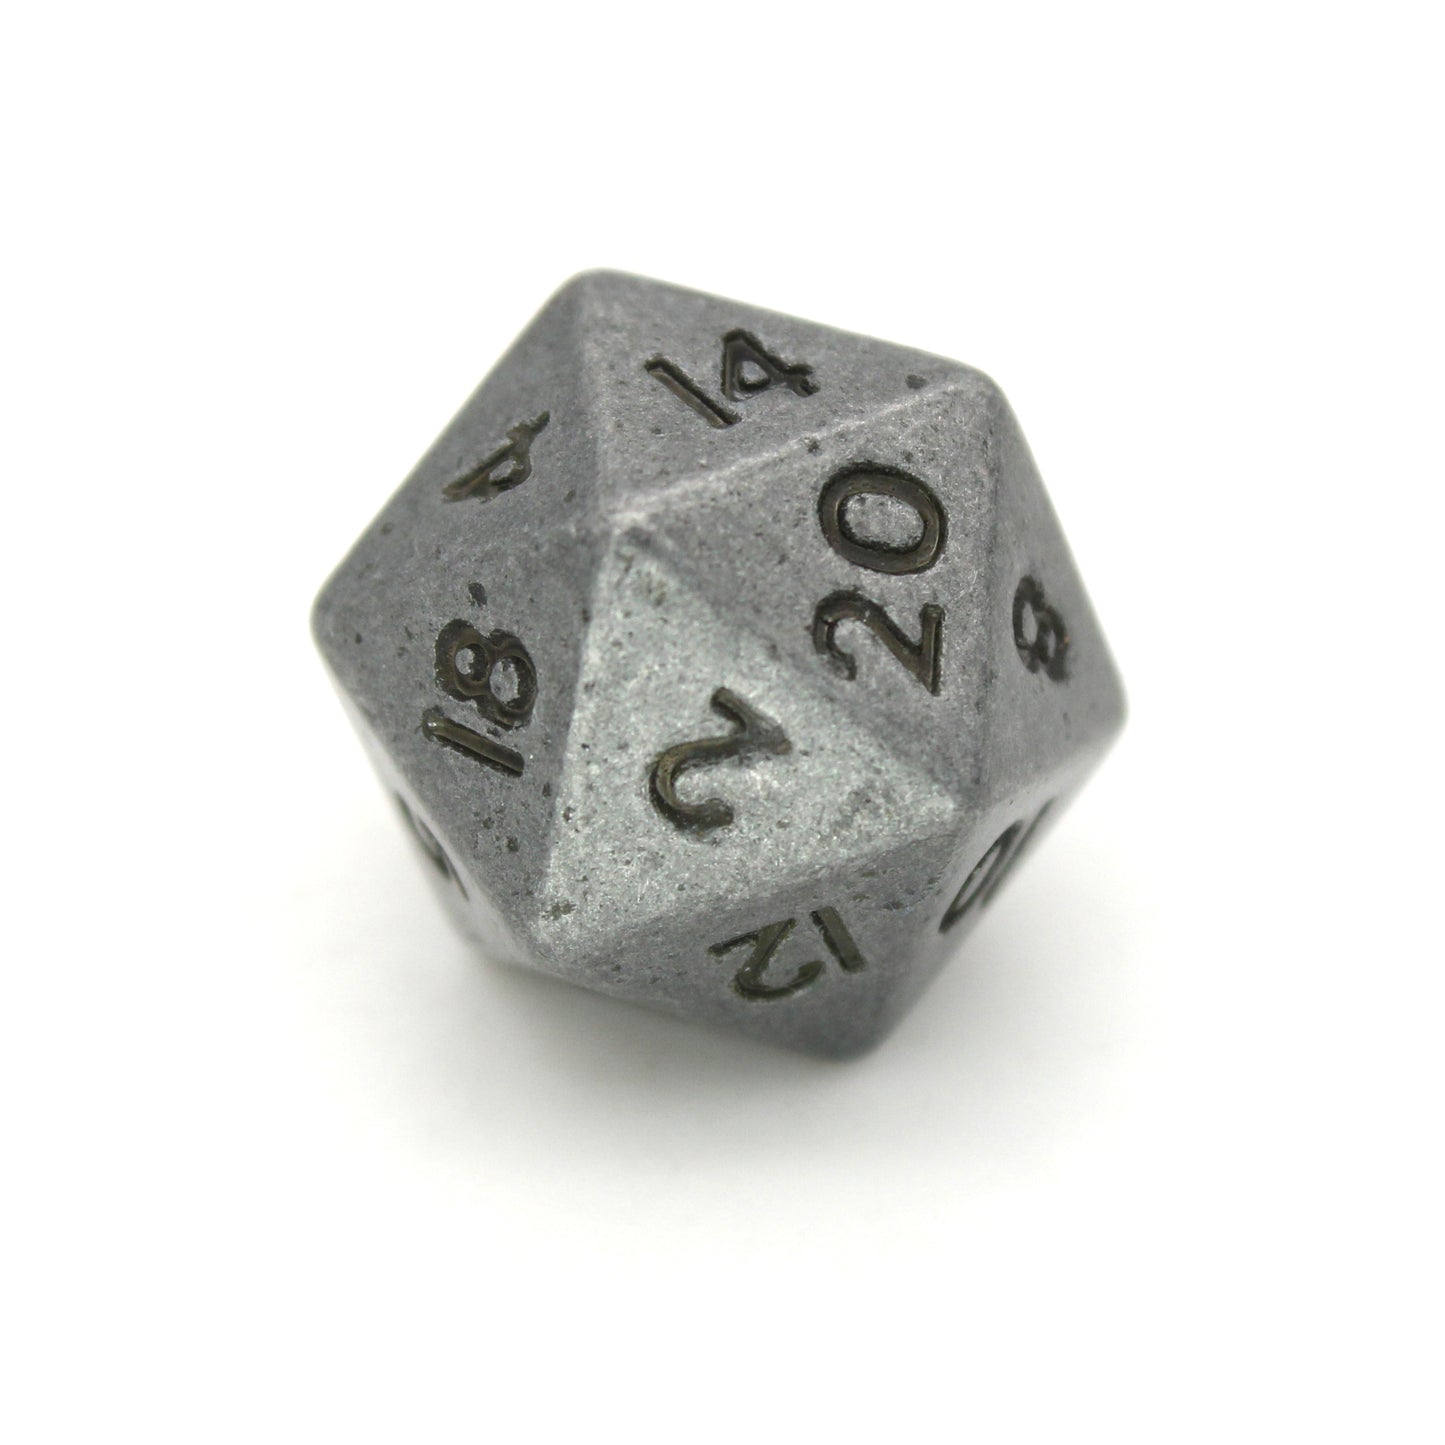 Rascals is a 7-piece set of ancient silver colored 10mm metal dice.